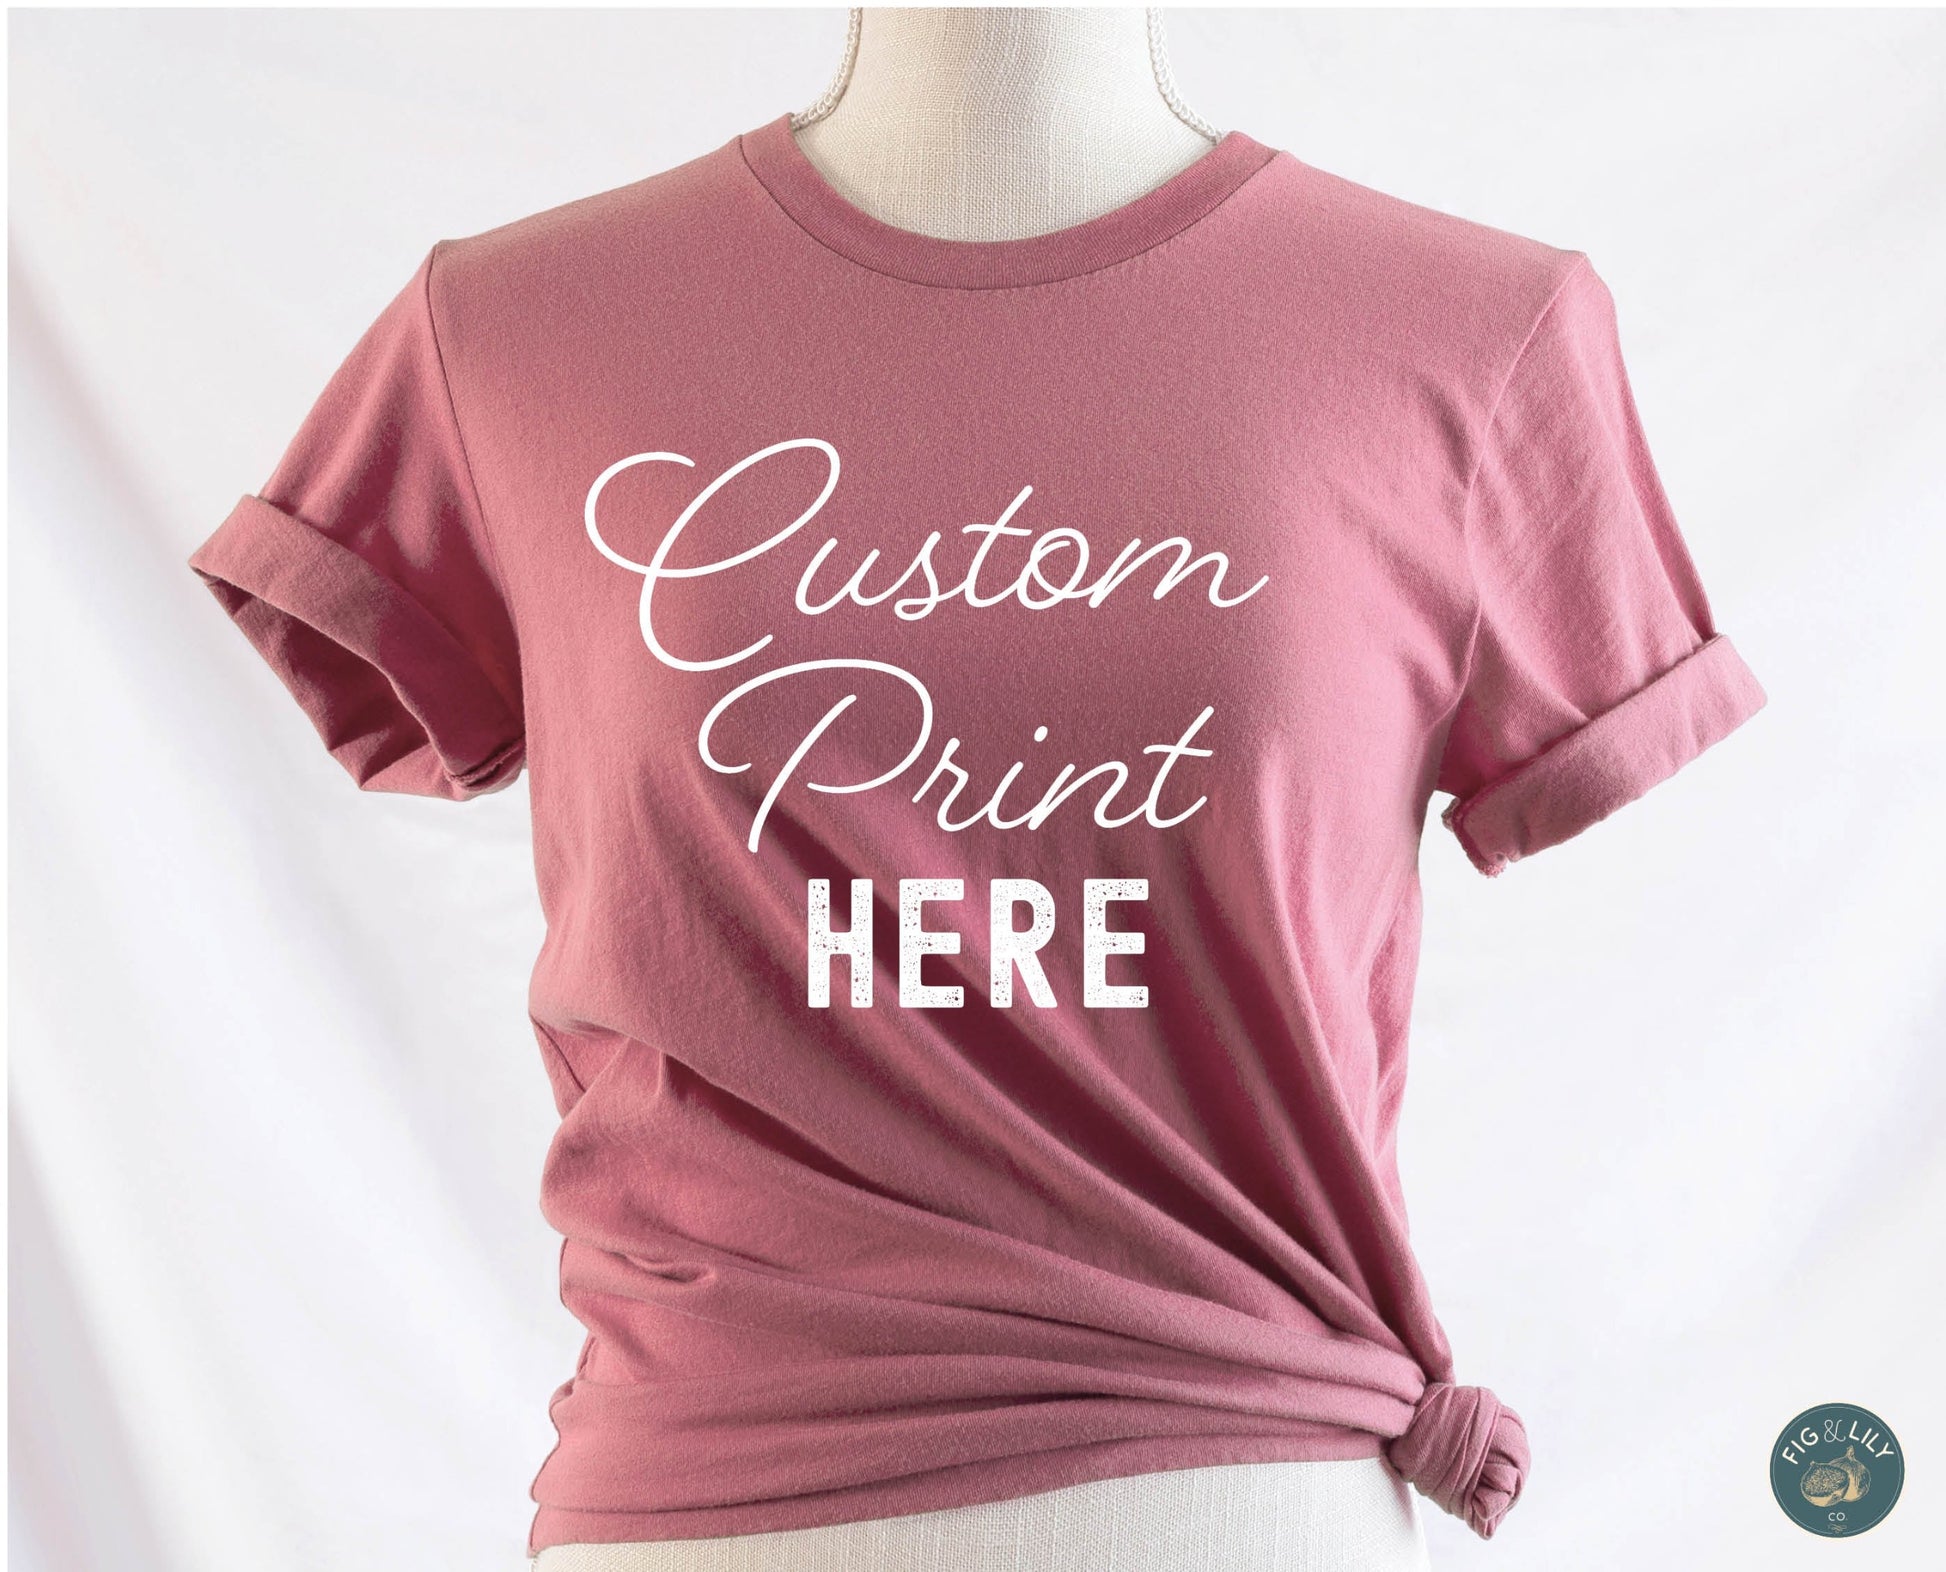 Fig & Lily Co. custom soft mavue dusty rose unisex t-shirt with your personalized design printed, custom graphic design tees for men and women